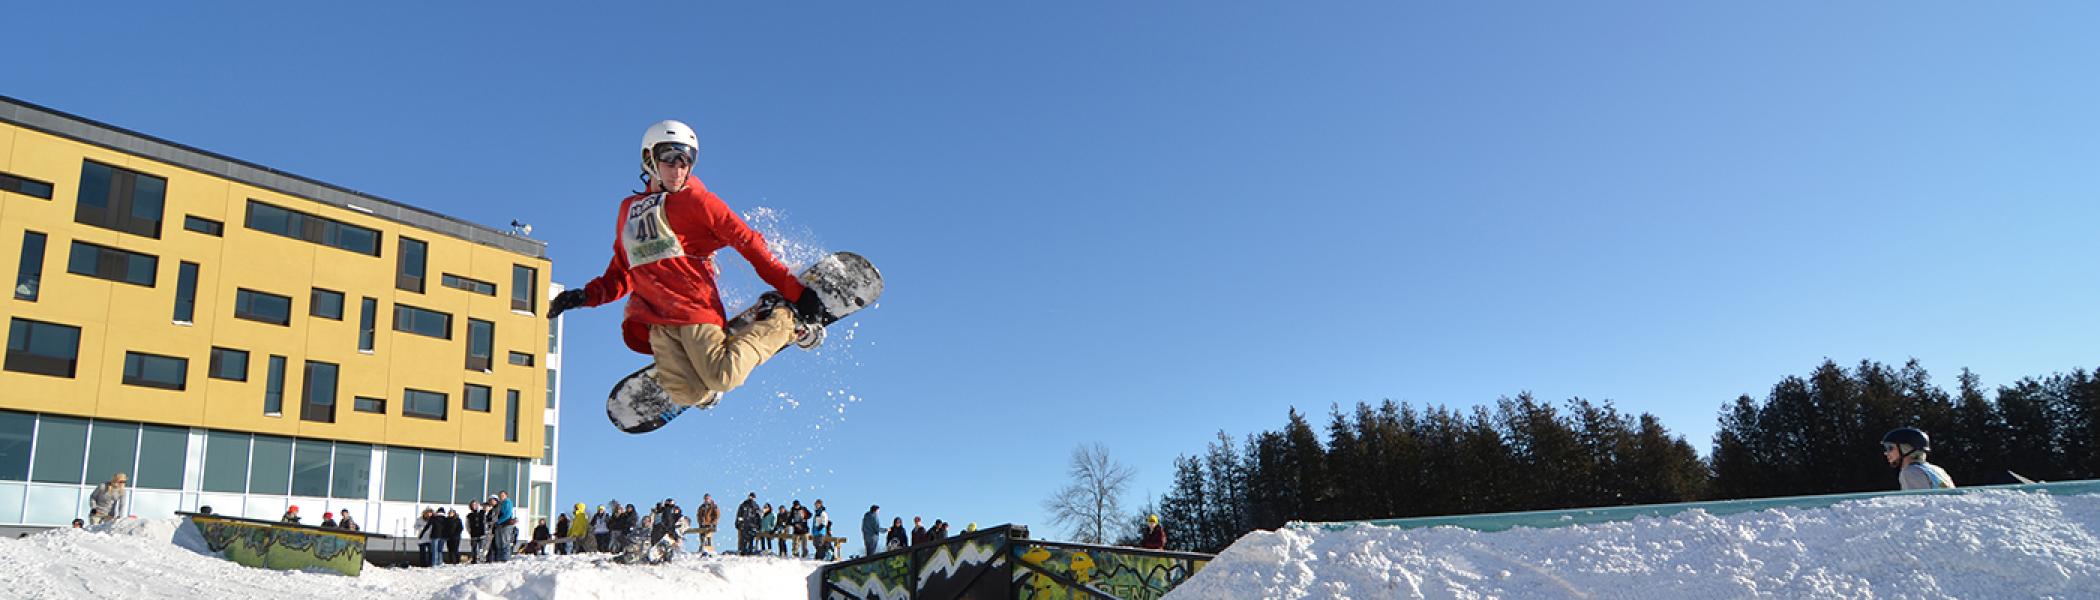 Student performing a snowboard air trick during railjam in the witer time